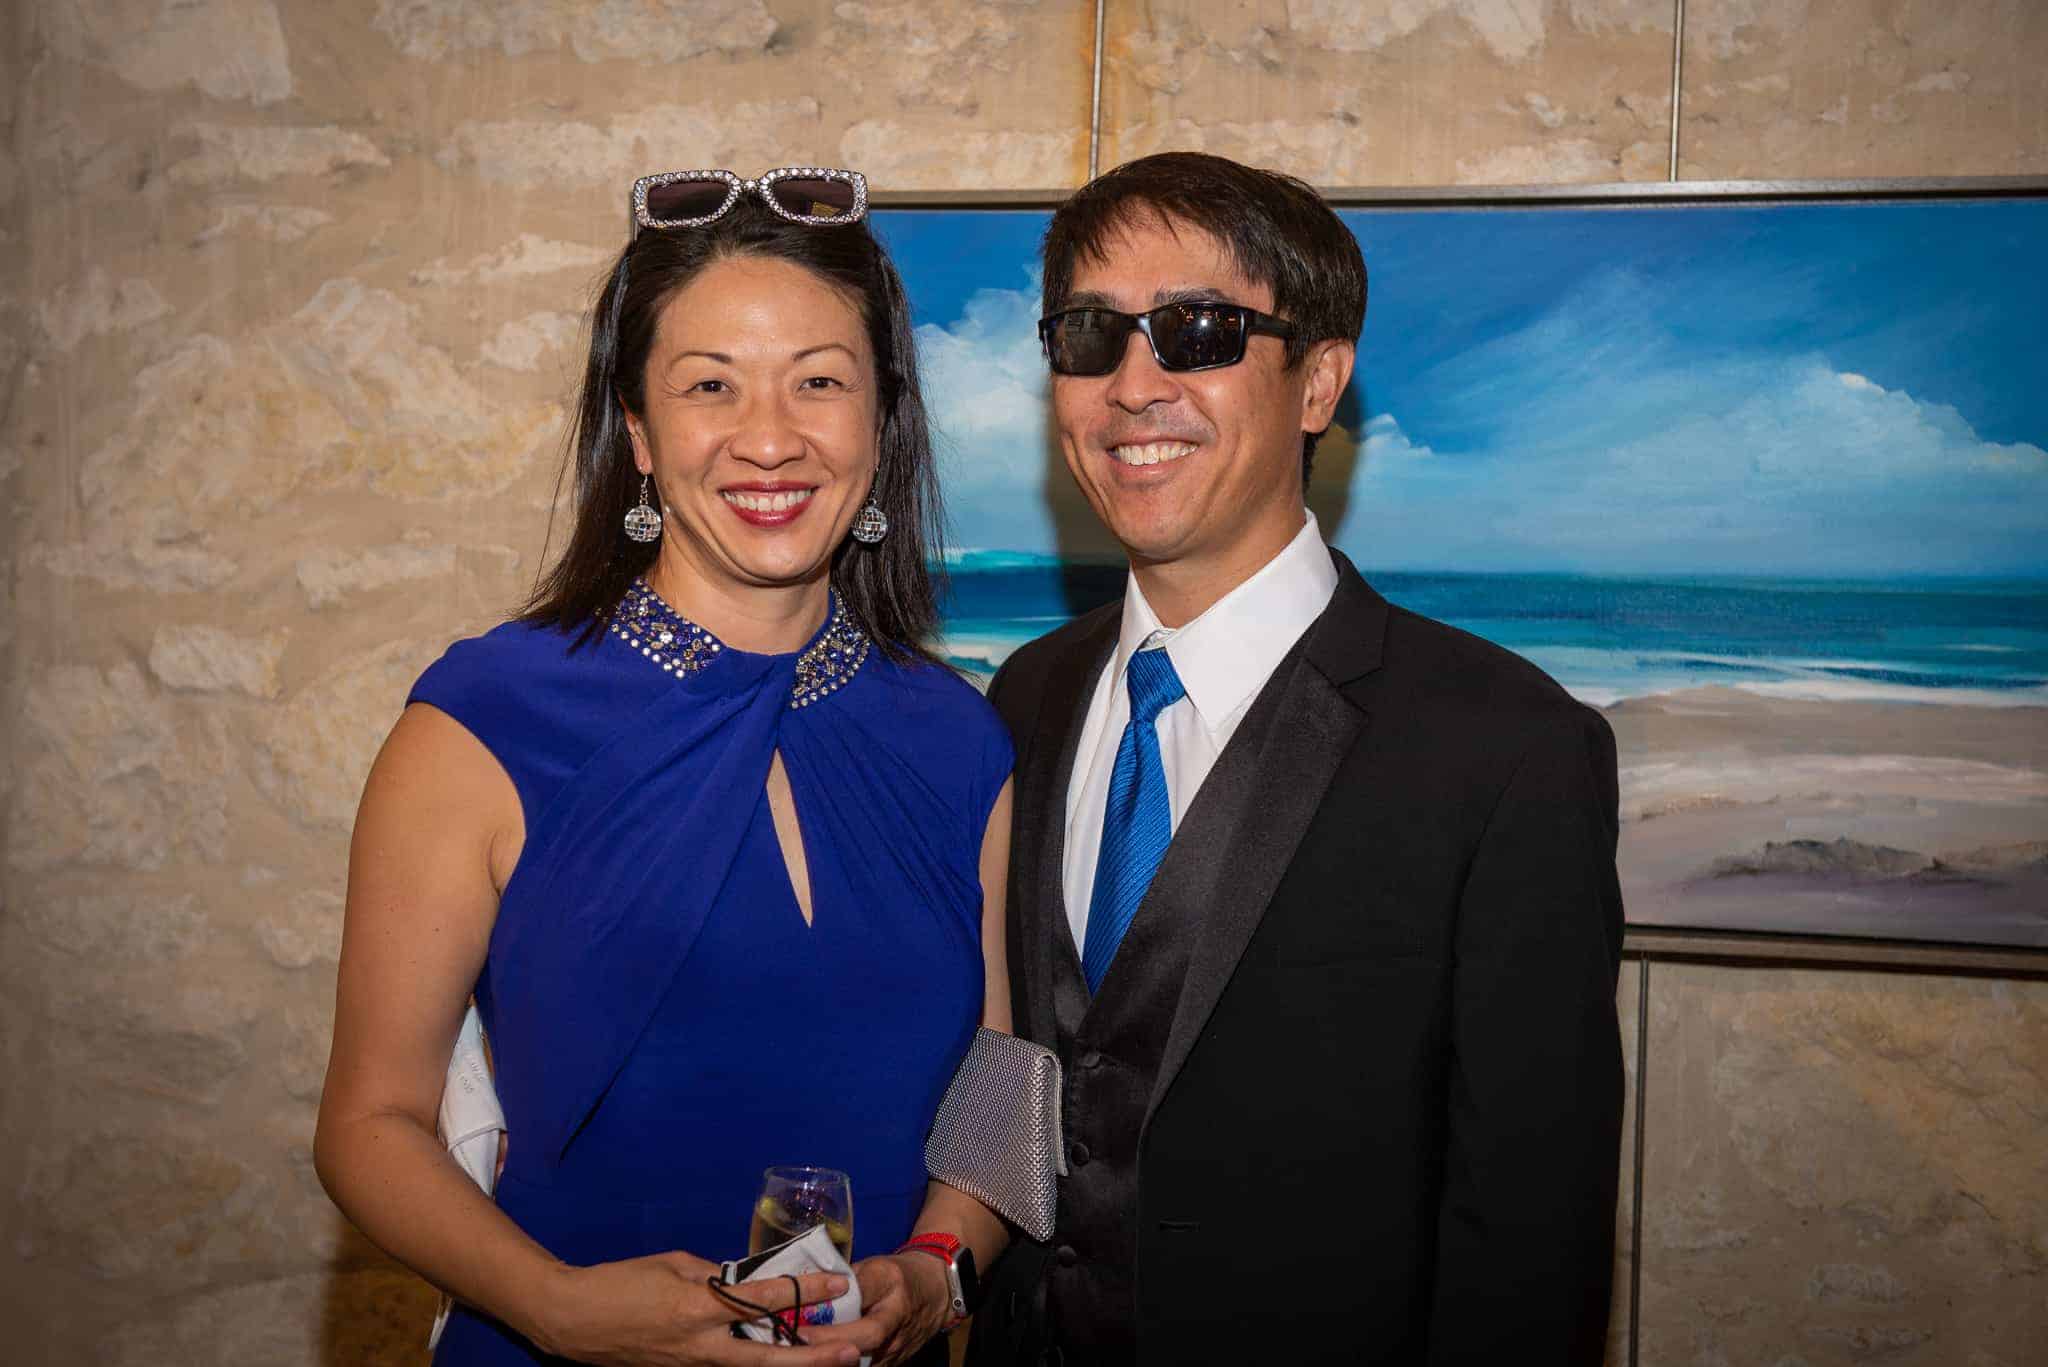 Dr. Jenny Hsieh and Dr. Lawton Chu